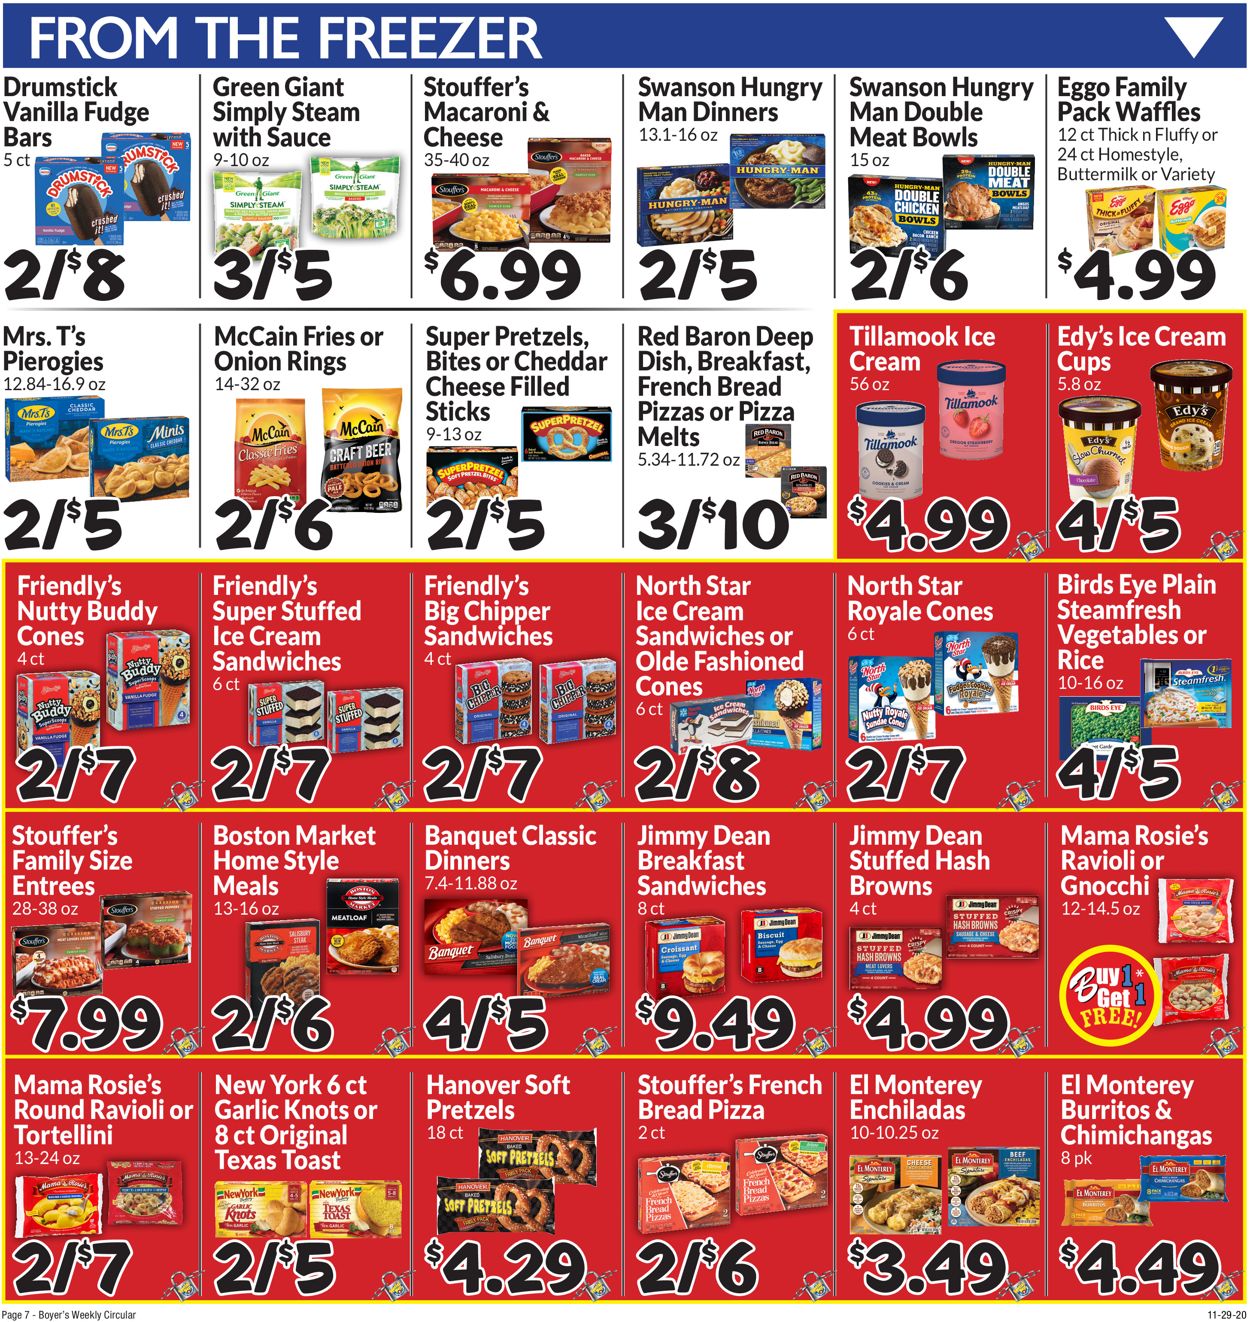 Boyer's Food Markets - Cyber Monday 2020 Weekly Ad Circular - valid 11/29-12/05/2020 (Page 10)